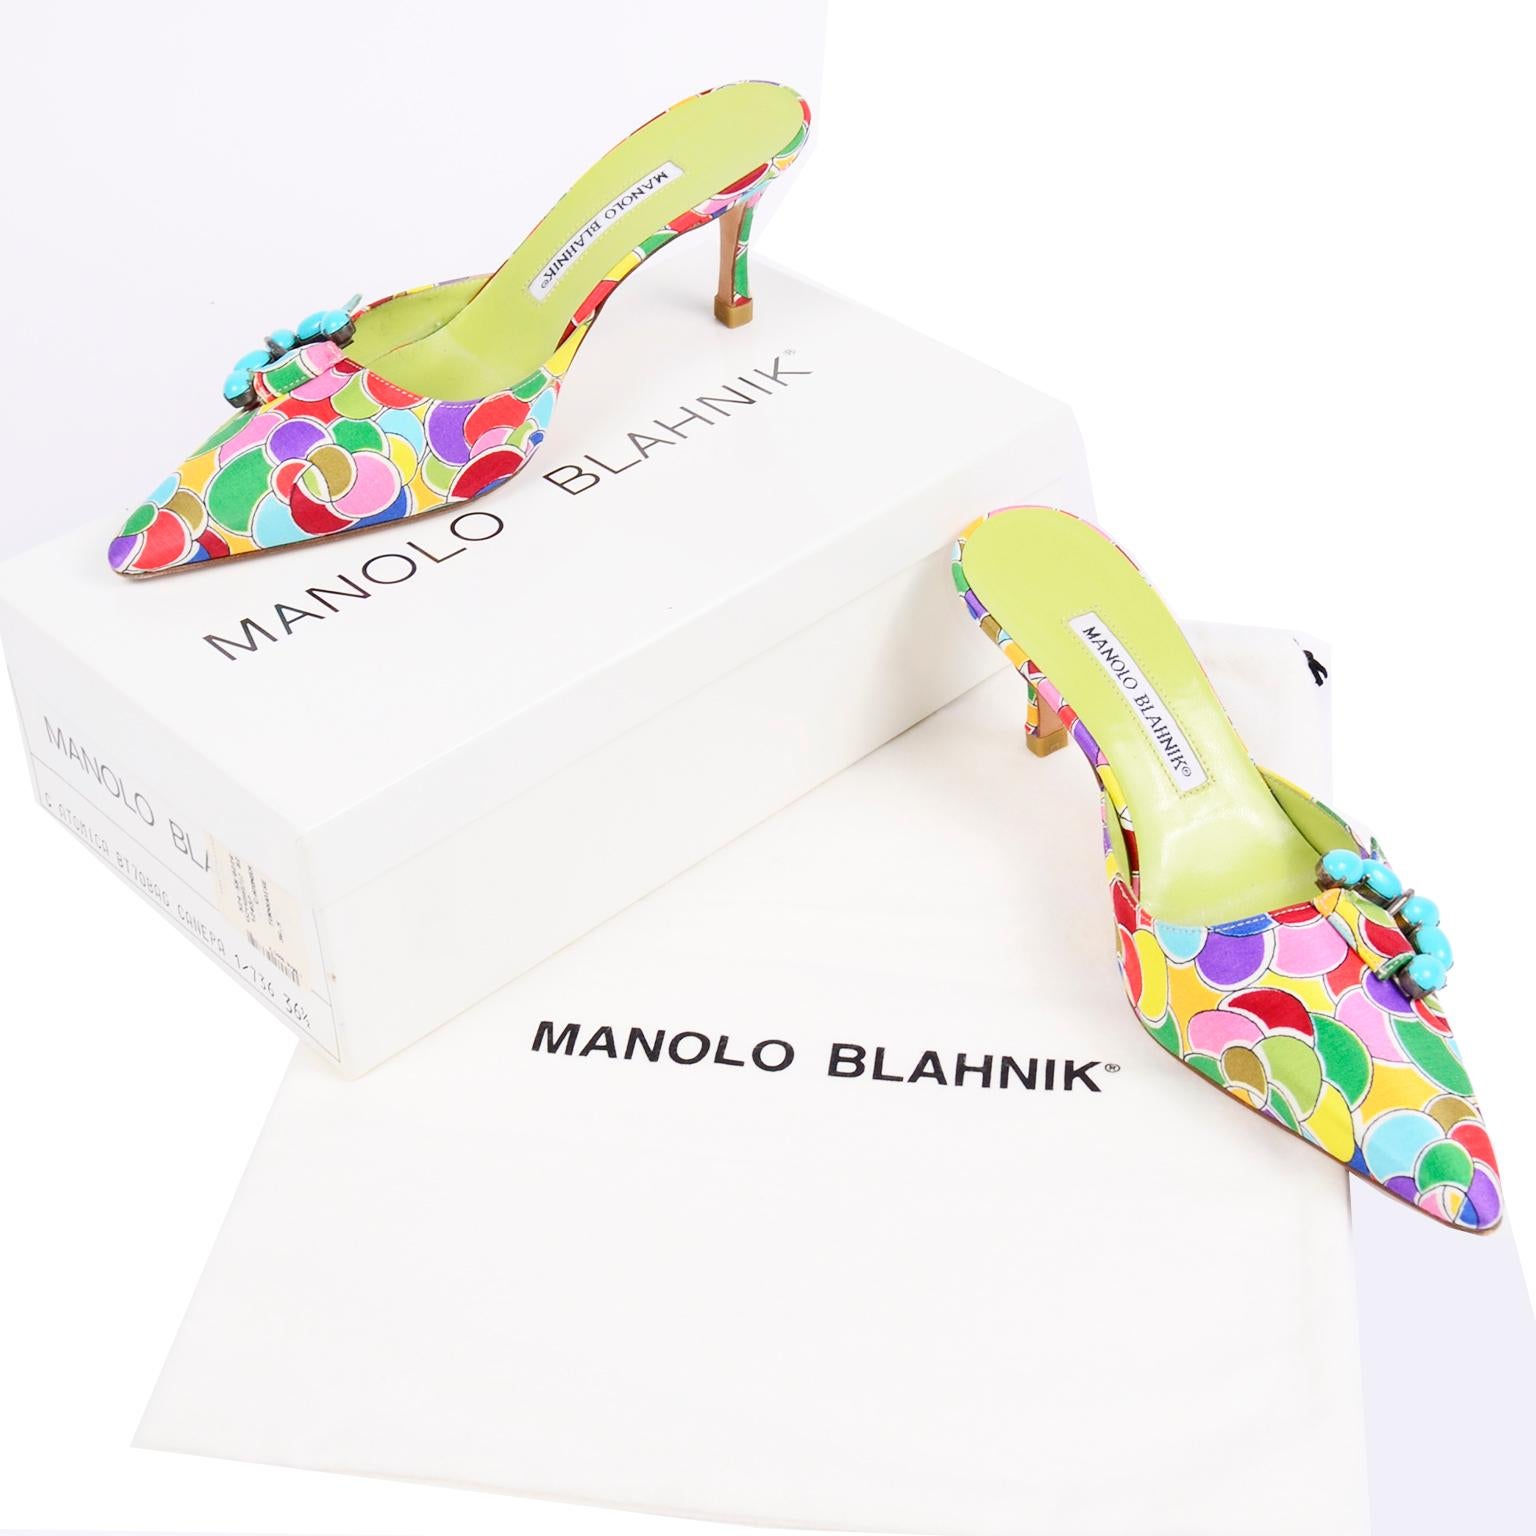 These are such fun, brightly colored Manolo Blahnik heeled mules with turquoise and rhinestone buckles. These fabulou shoes have a colorful printed pattern in shades of blue, red, light blue, purple, tangerine, yellow, green, olive, and white. The